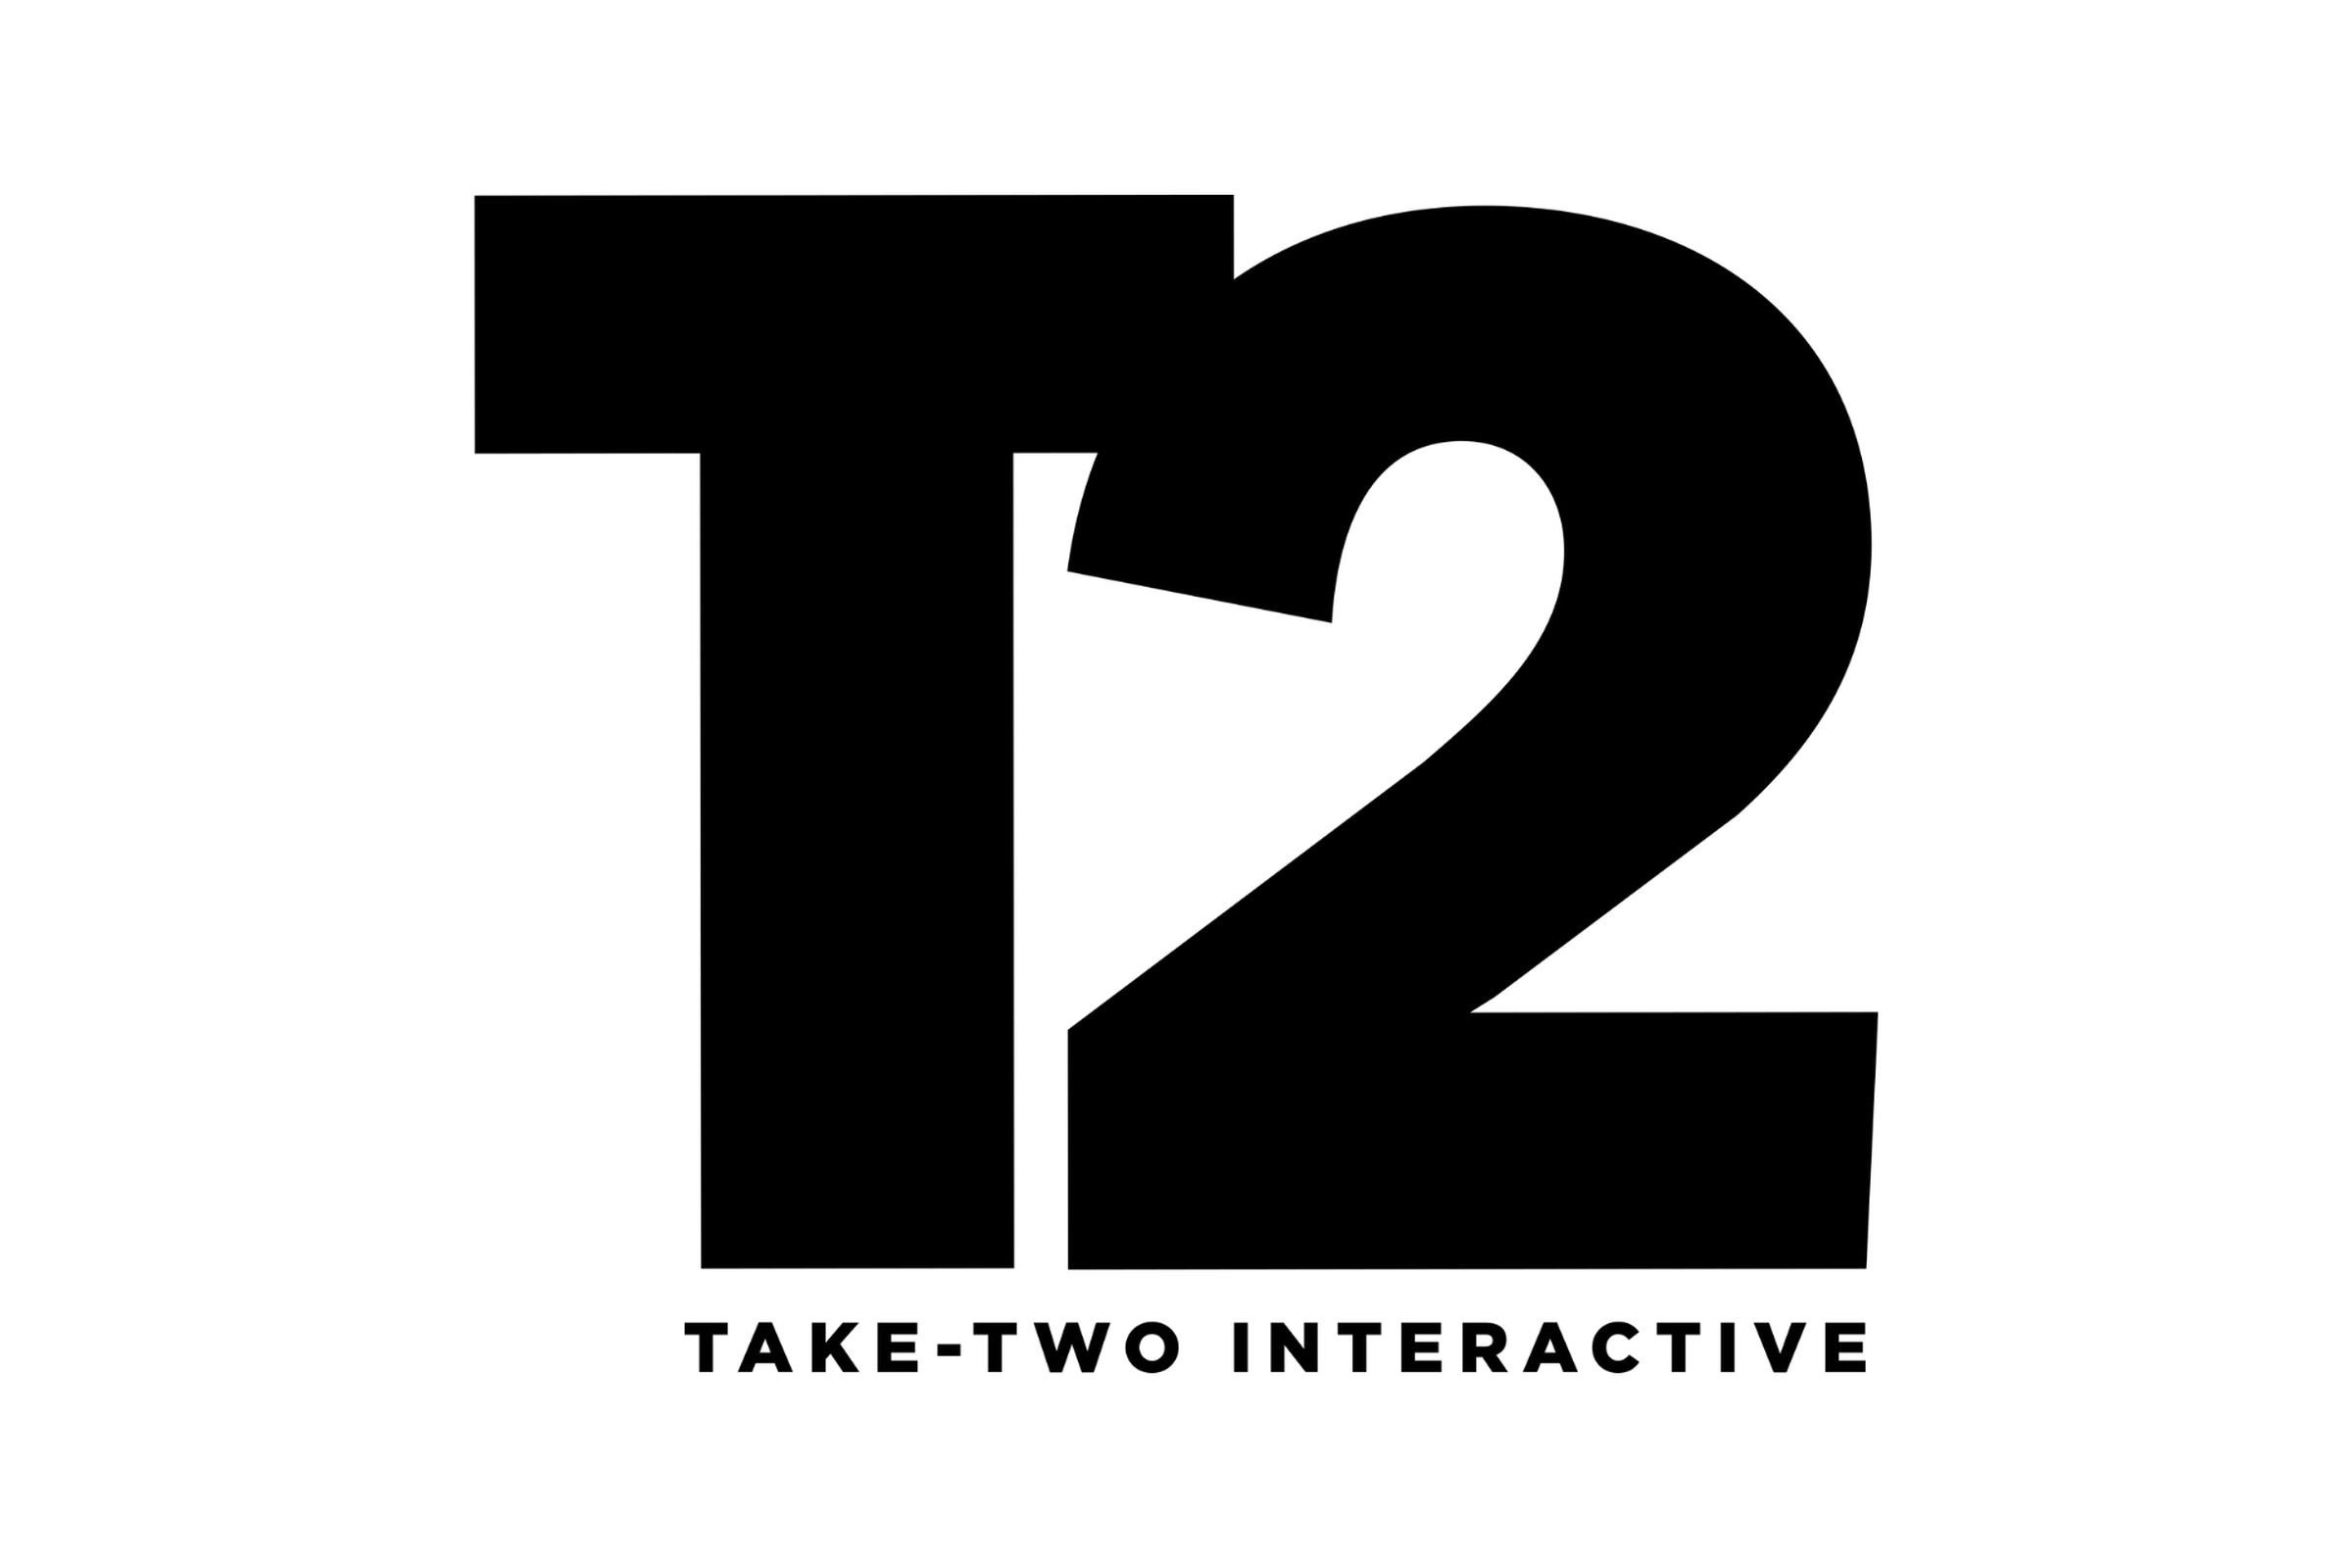 The Take-Two Interactive logo against a white background.